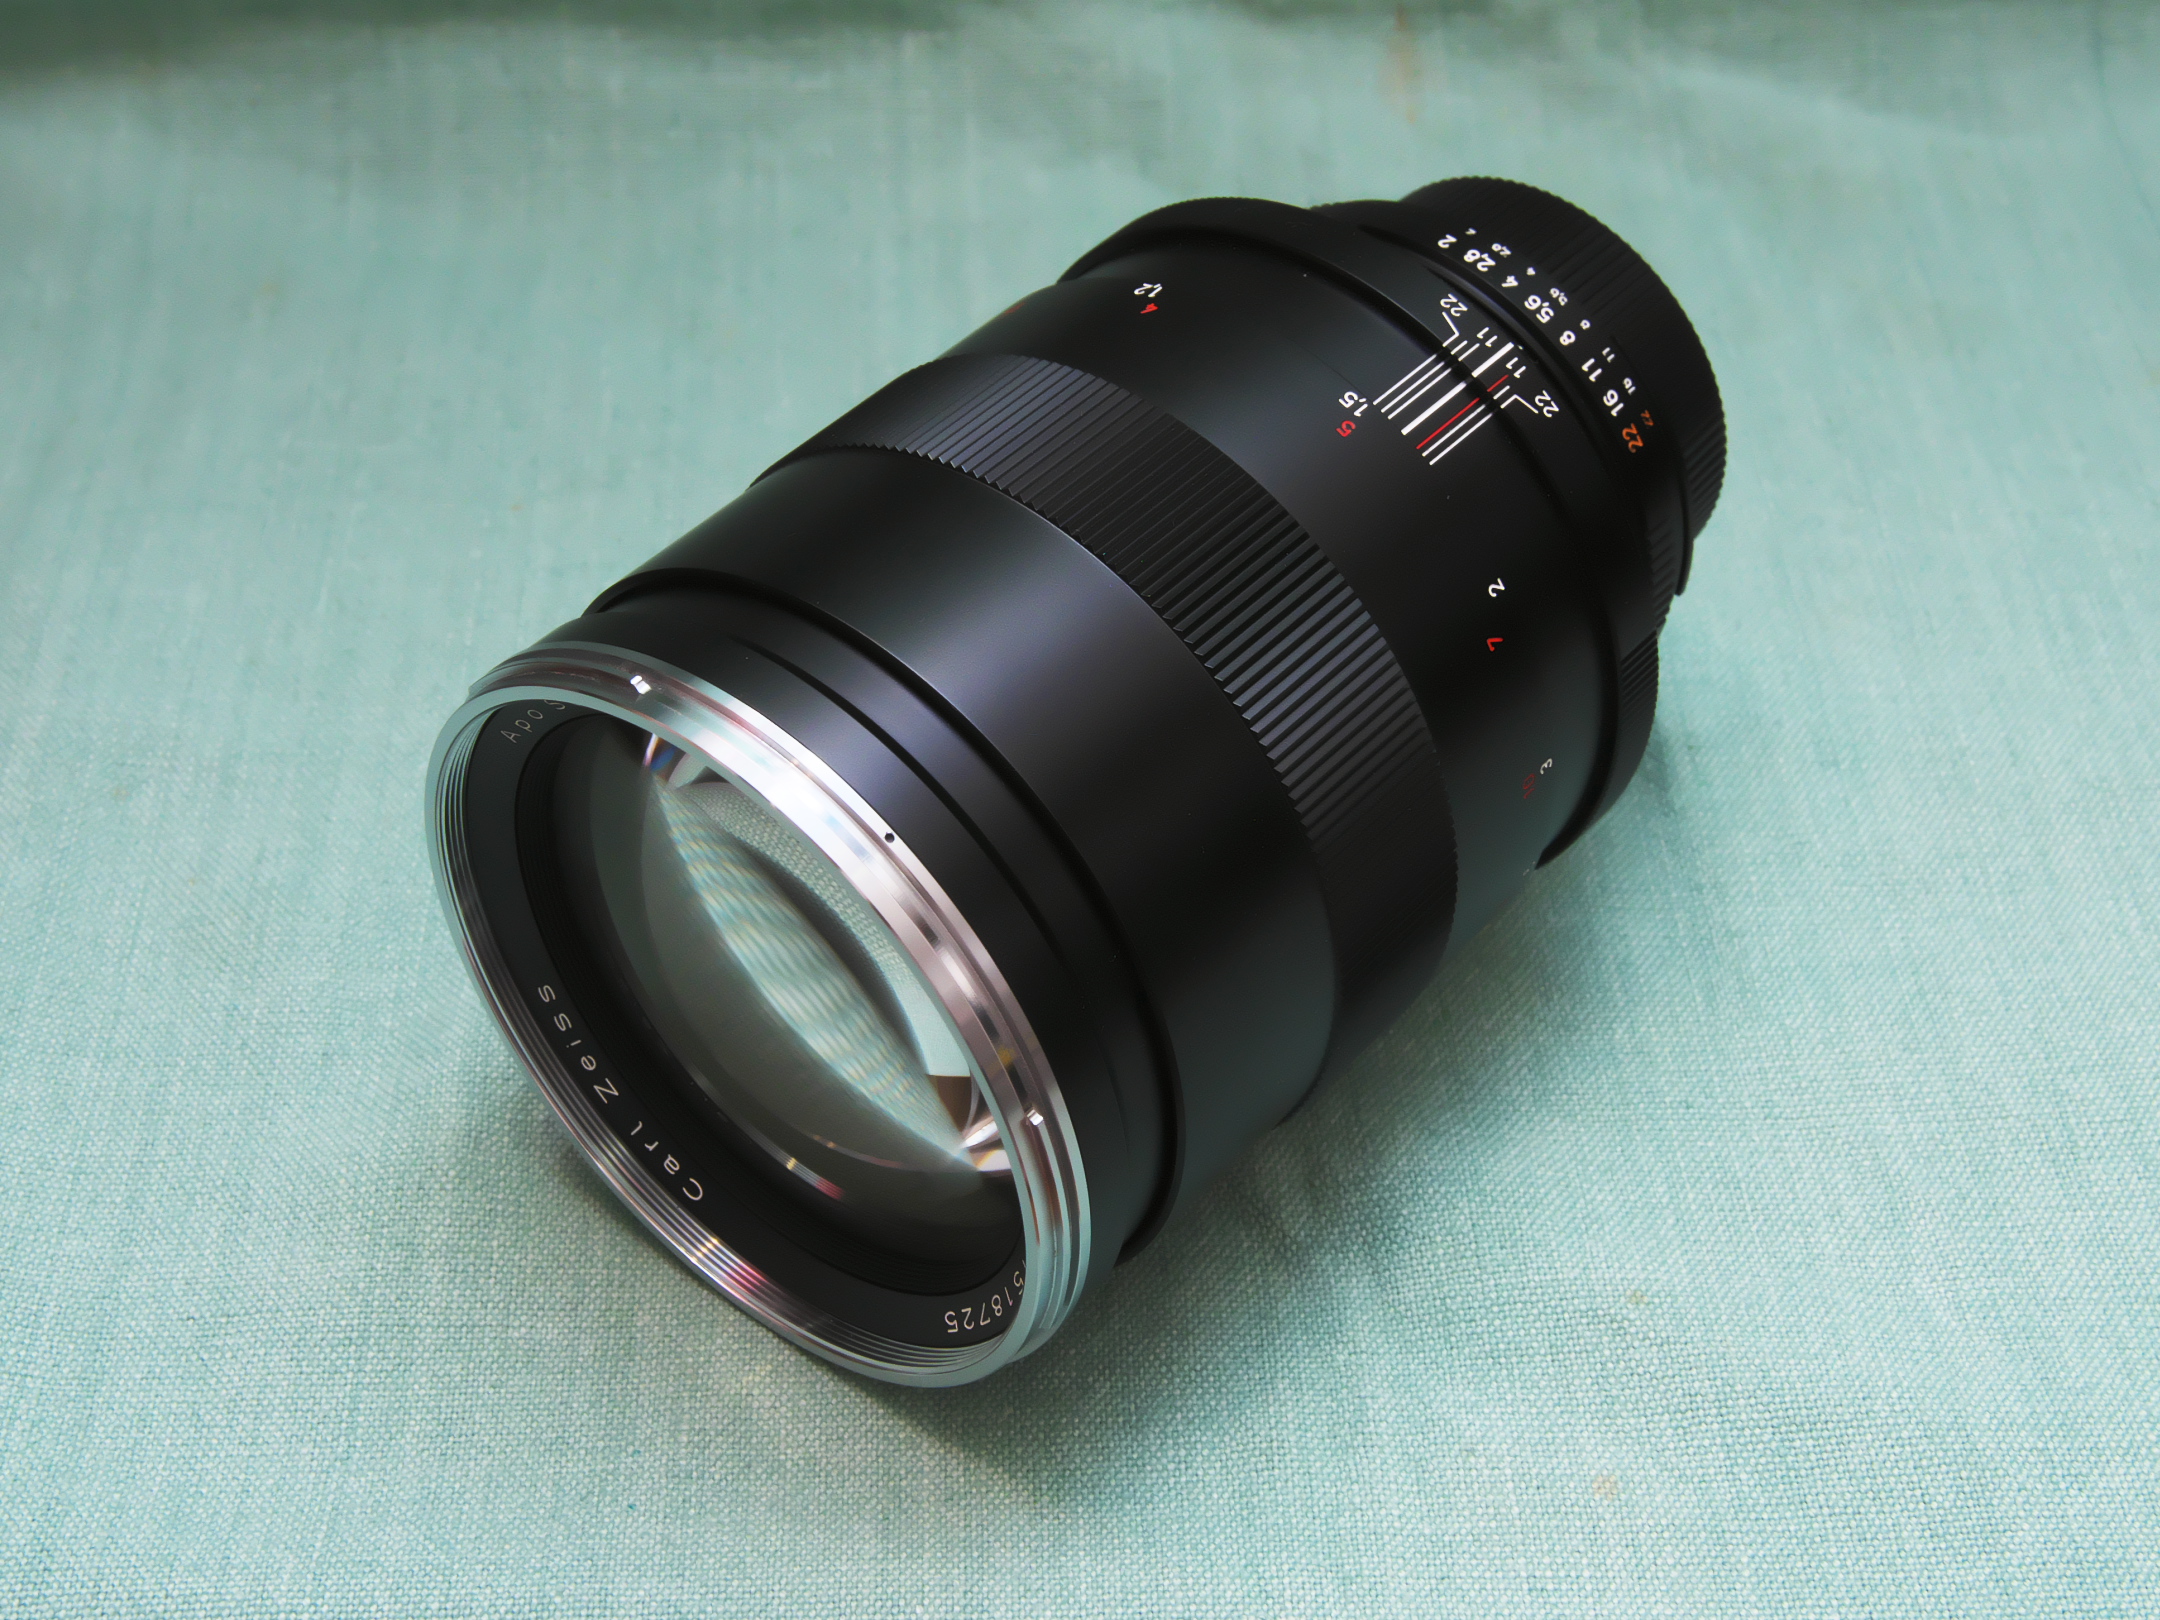 Carl Zeiss Apo Sonnar T*2/135mm ZF.2 | 撮人（とりんちゅ）